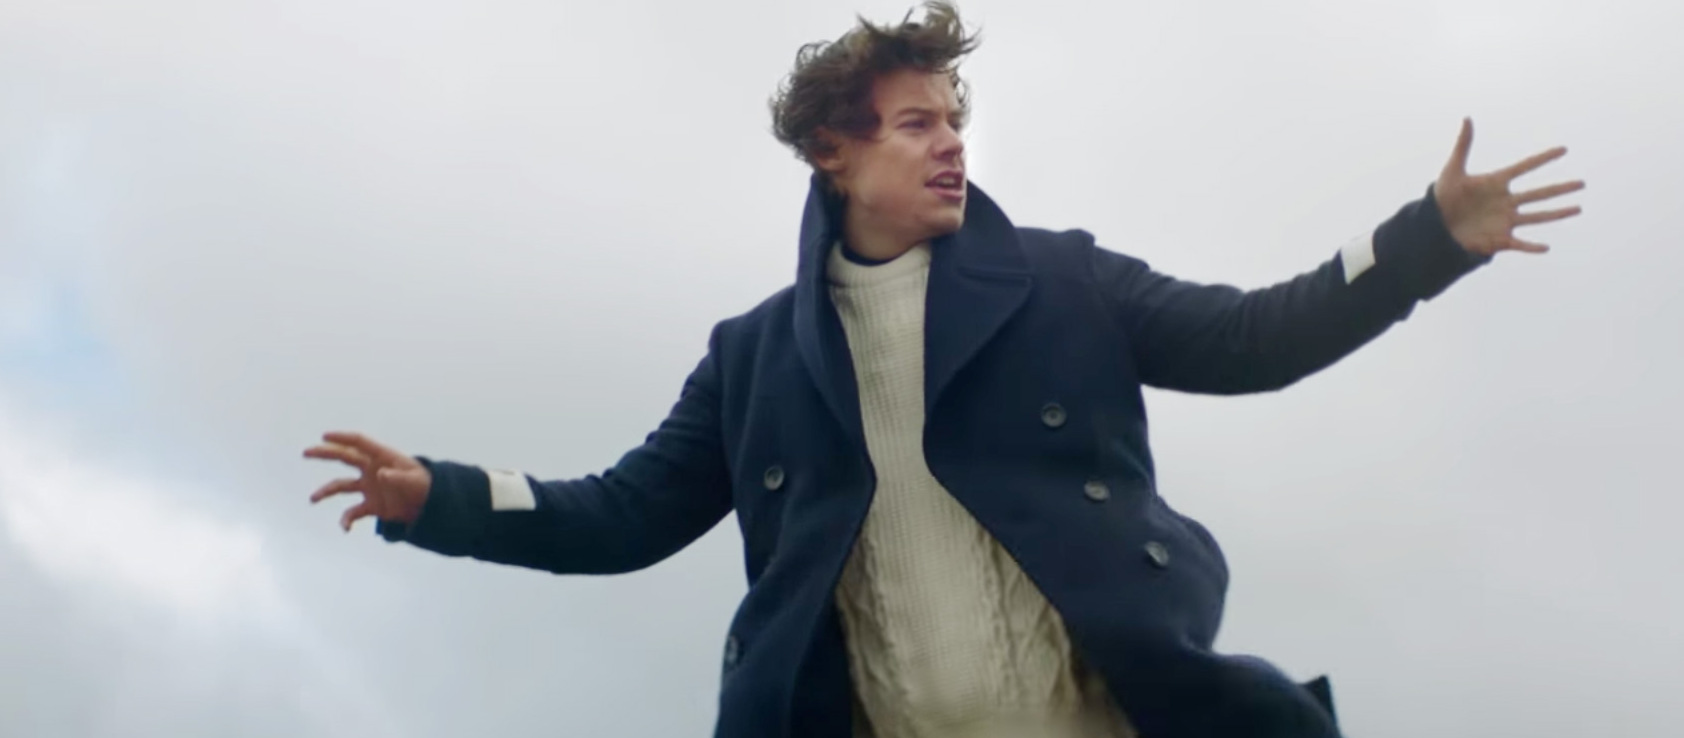 Harry Styles Sign Of The Times Number1 Official Video Klip Hd Izle